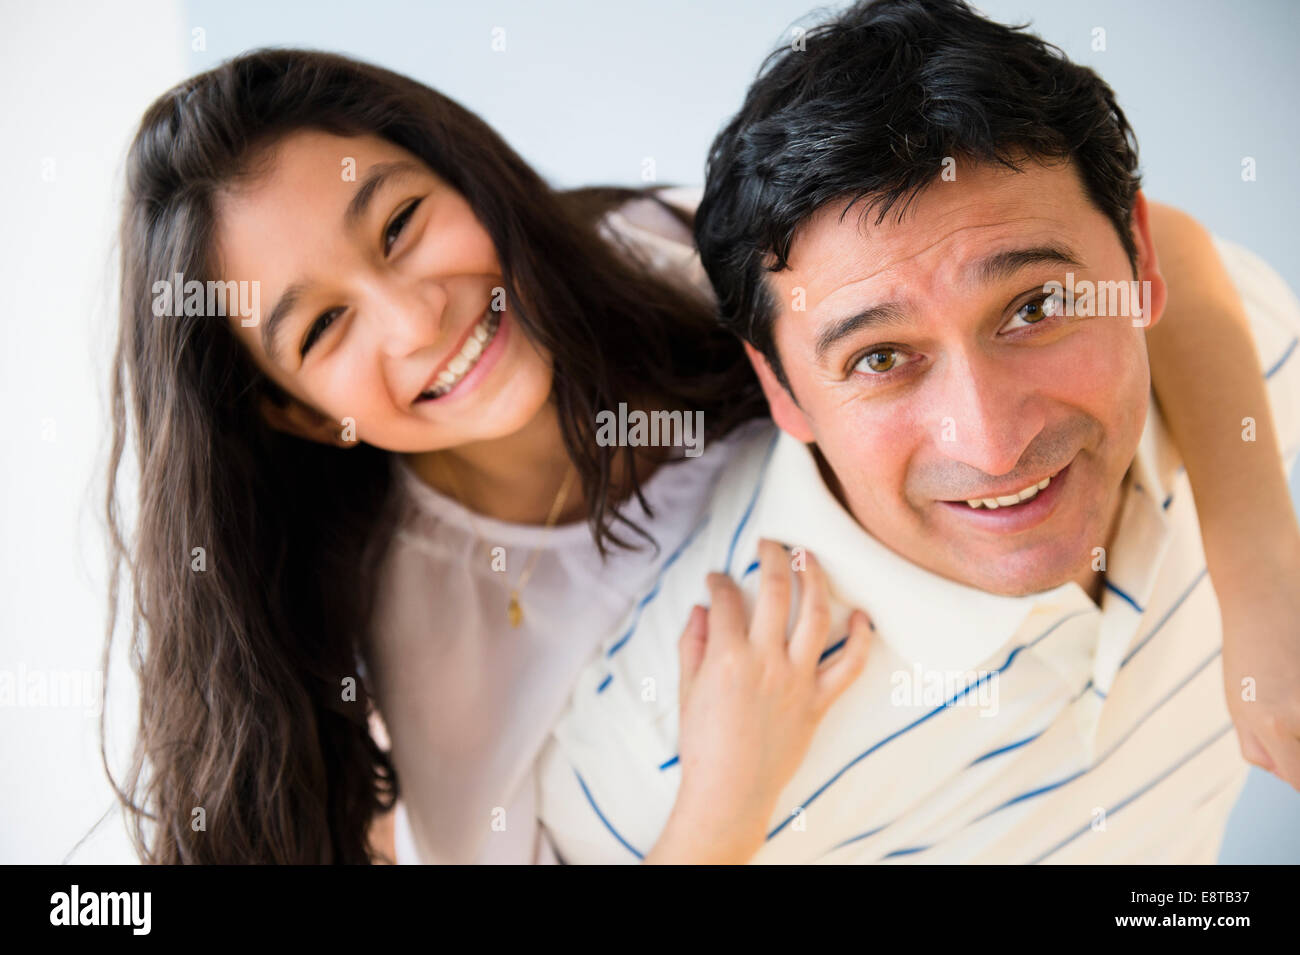 Hispanic father carrying daughter piggyback Banque D'Images